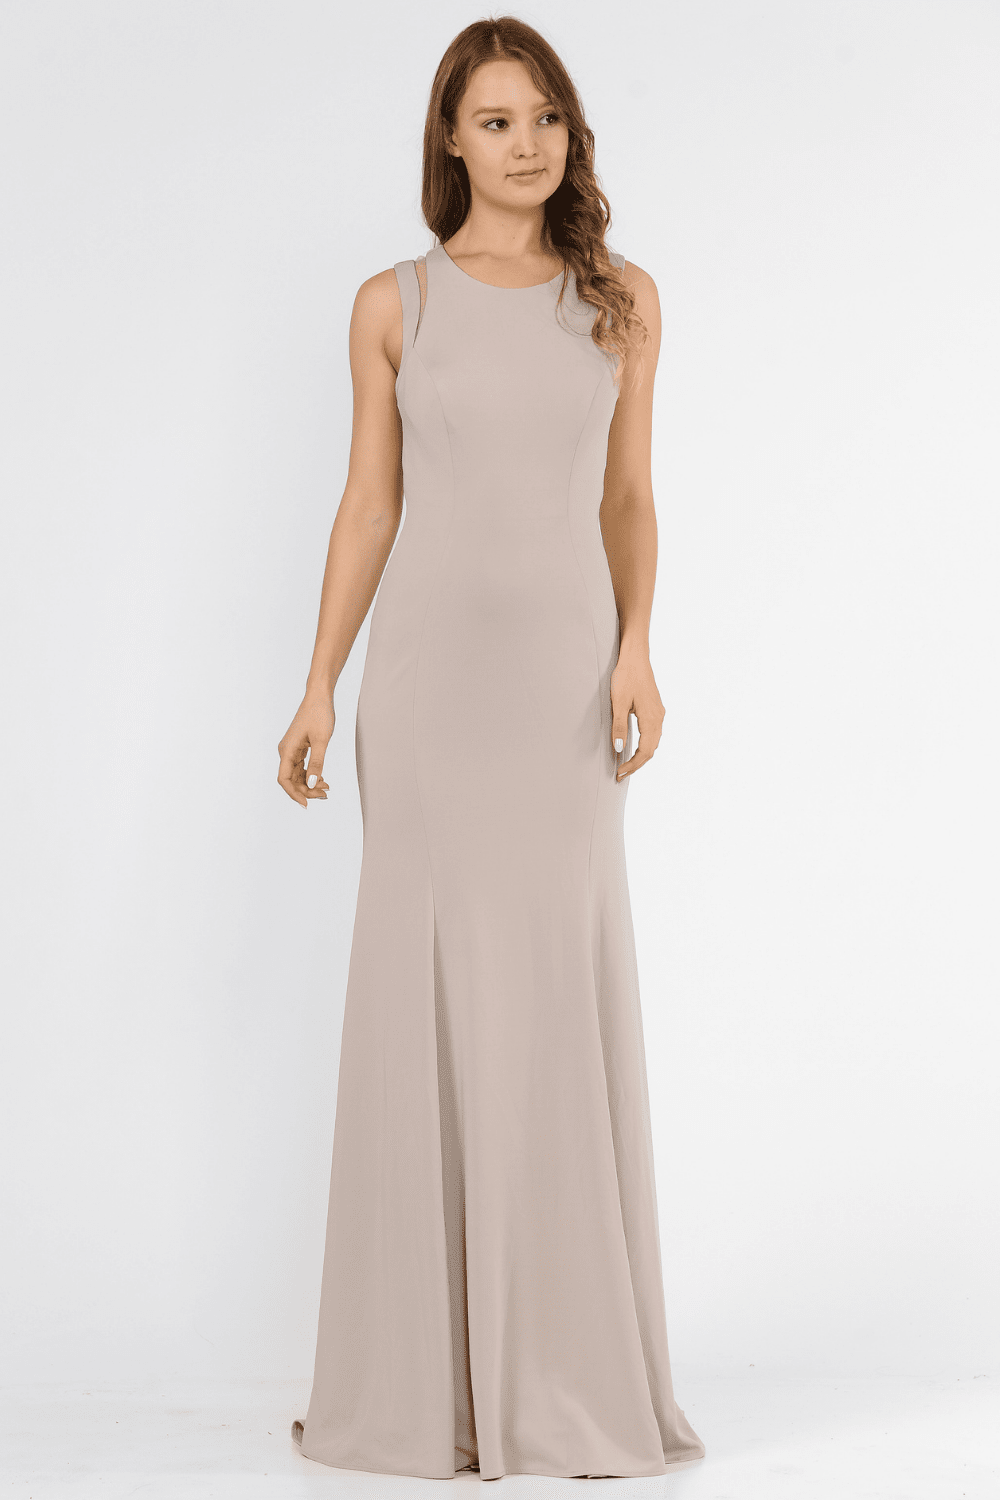 Long Formal Dress with Back Cut Outs by Poly USA 8232